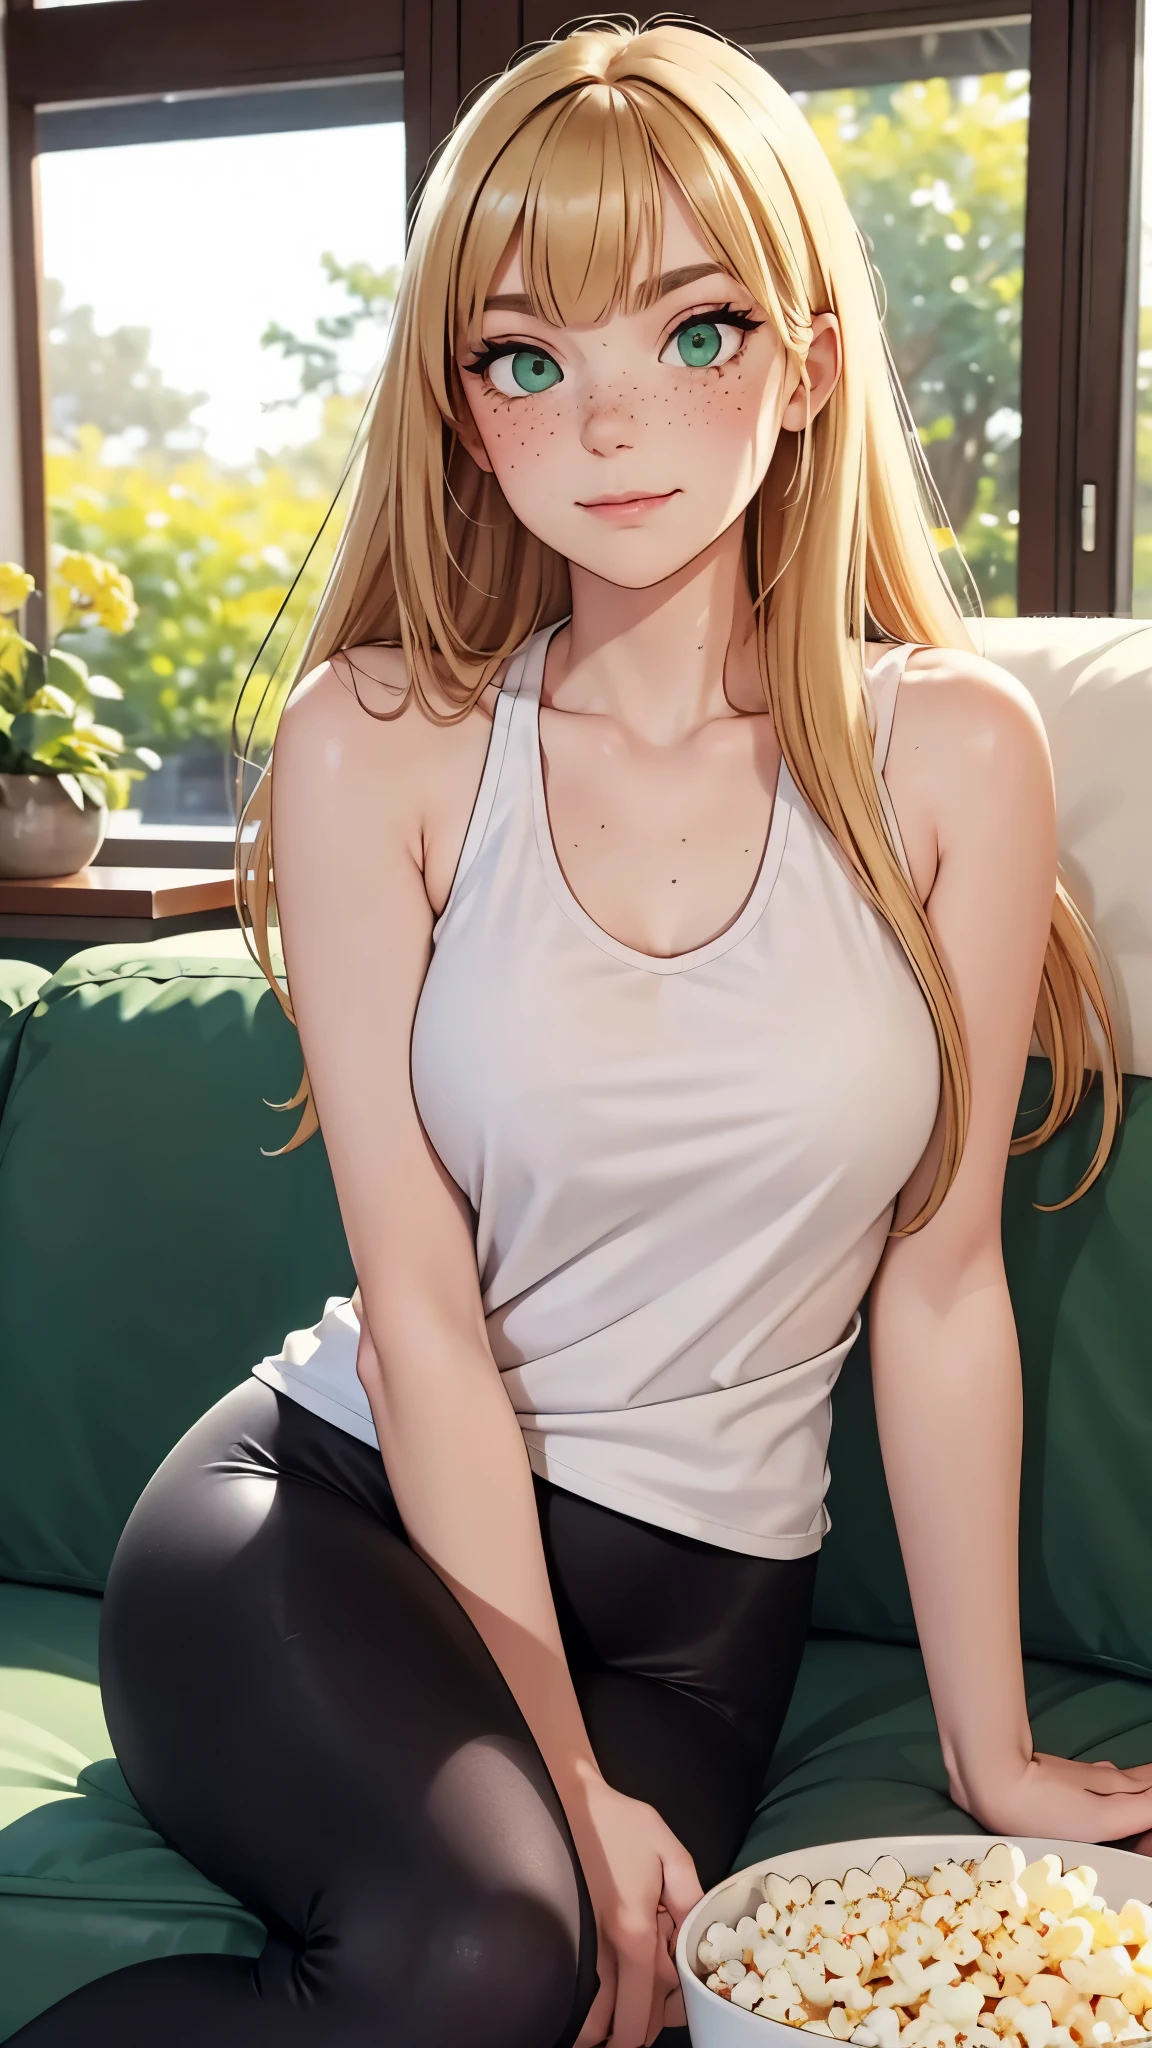 ((best quality)), ((masterpiece)), (detailed), smug face, perfect face, blonde straight hair, bangs, green eyes, freckles, blush, white loose tank top, black leggings,

on a couch eating popcorn, legs spread